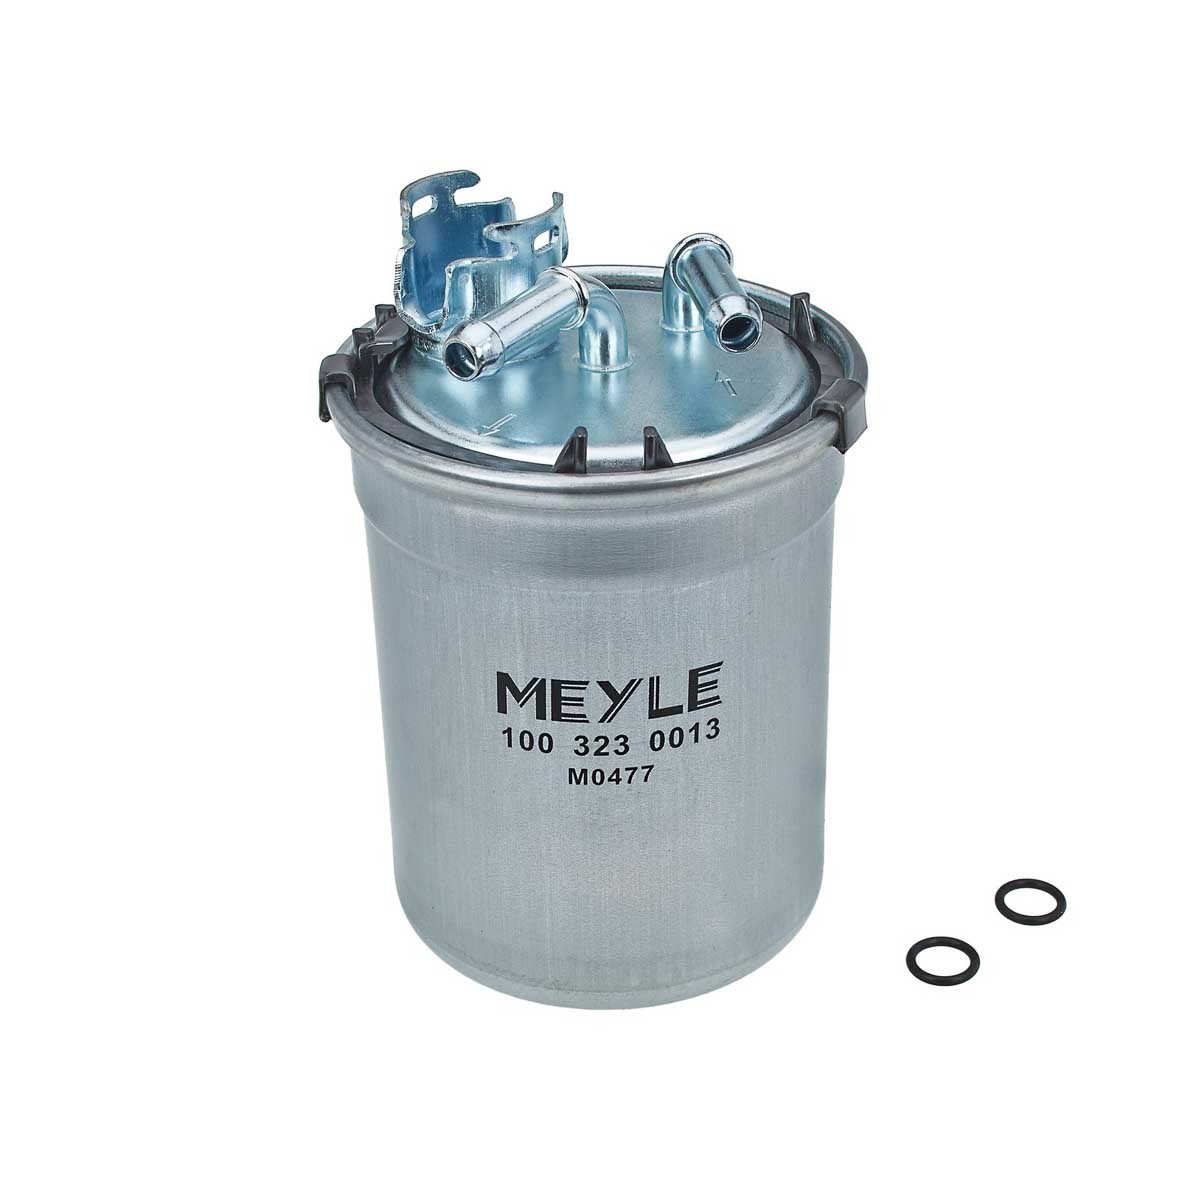 Great value for money - MEYLE Fuel filter 100 323 0013